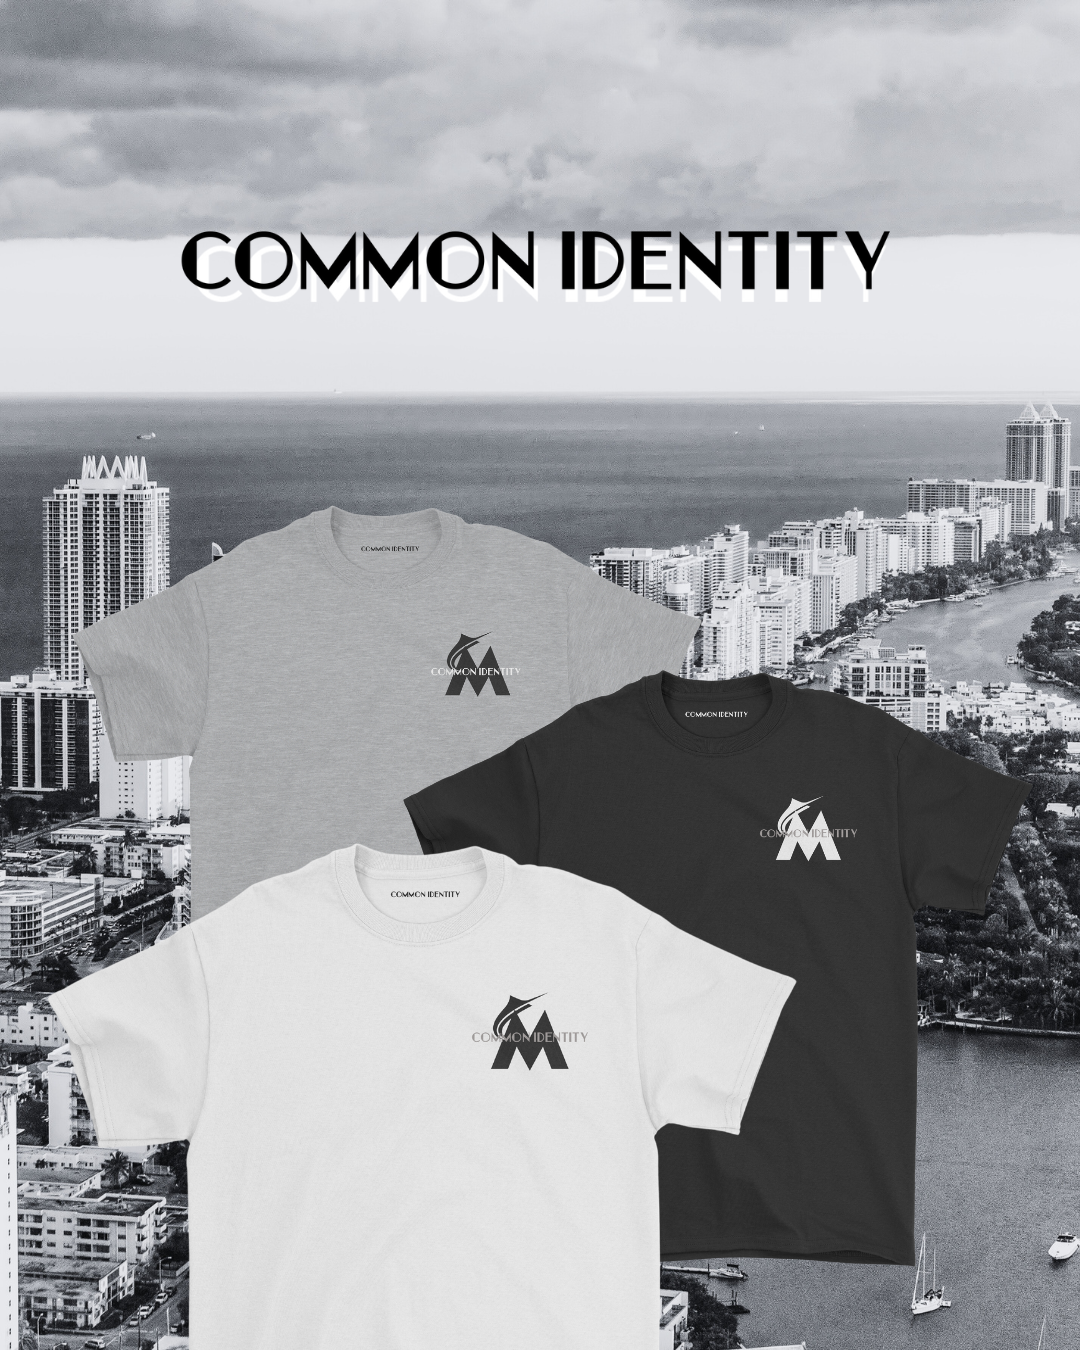 Everyday Essential "Miami Marlins" Tee - White